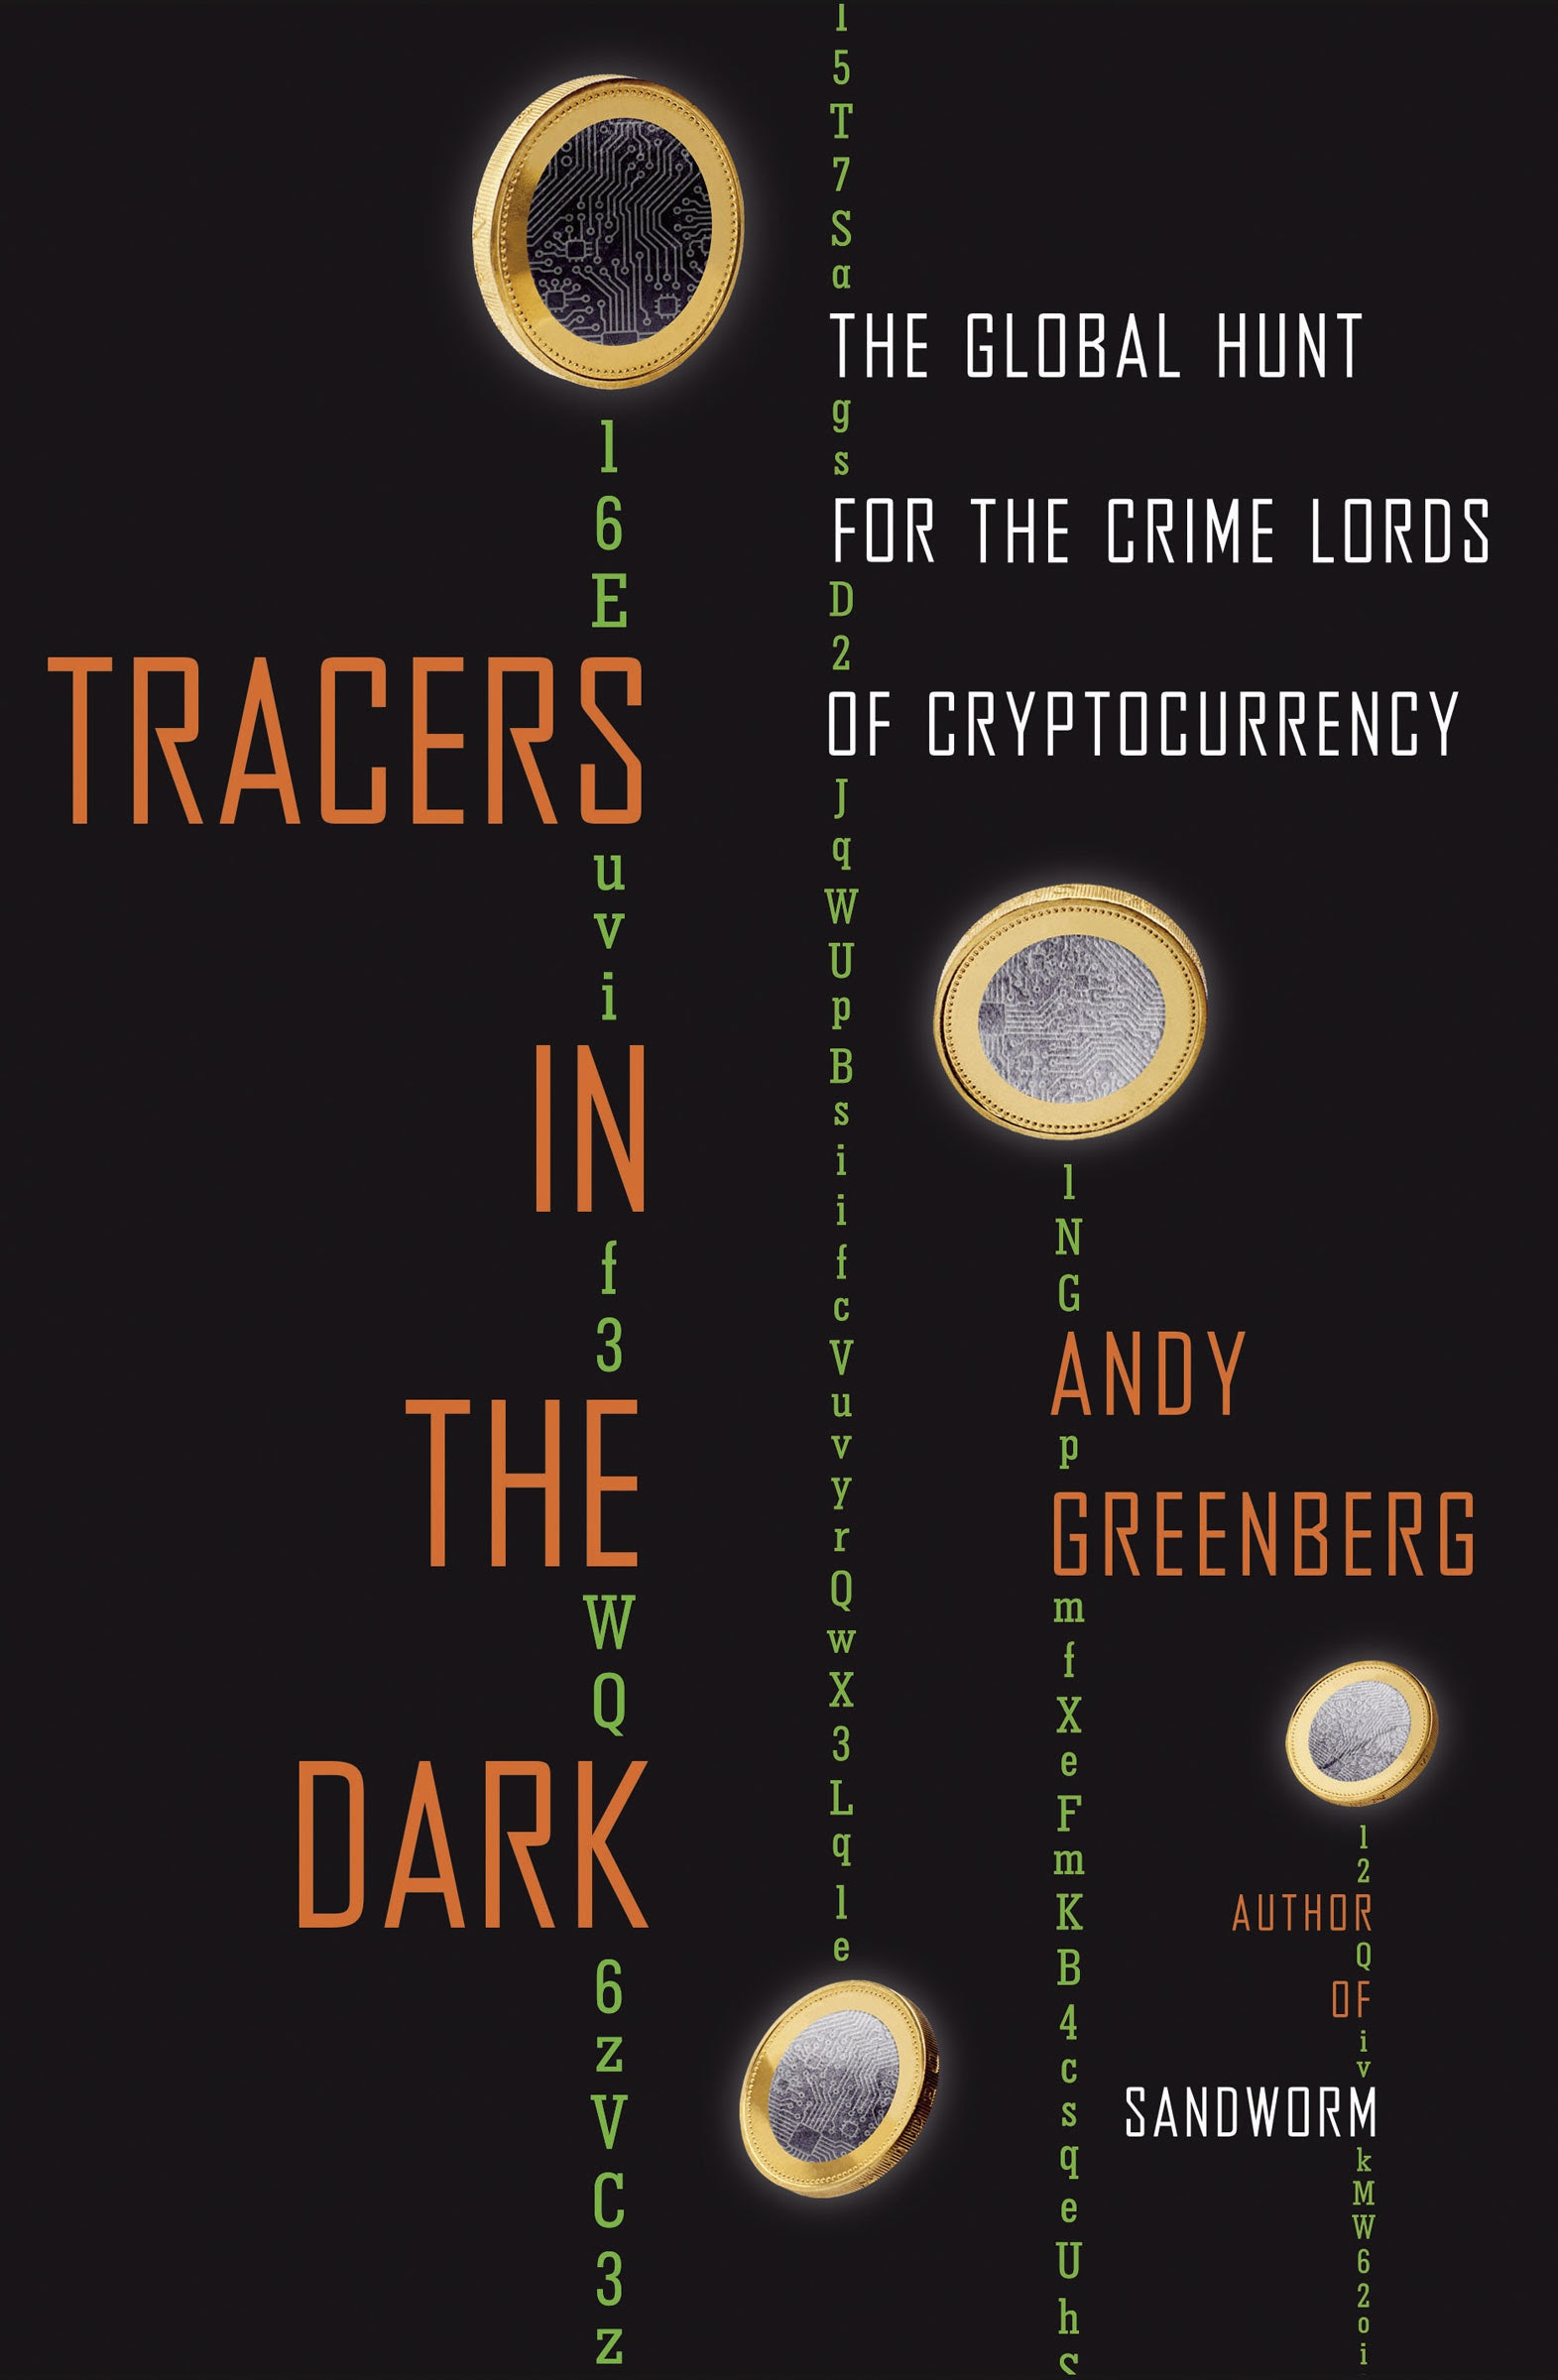 Tracers in the Dark Book jacket